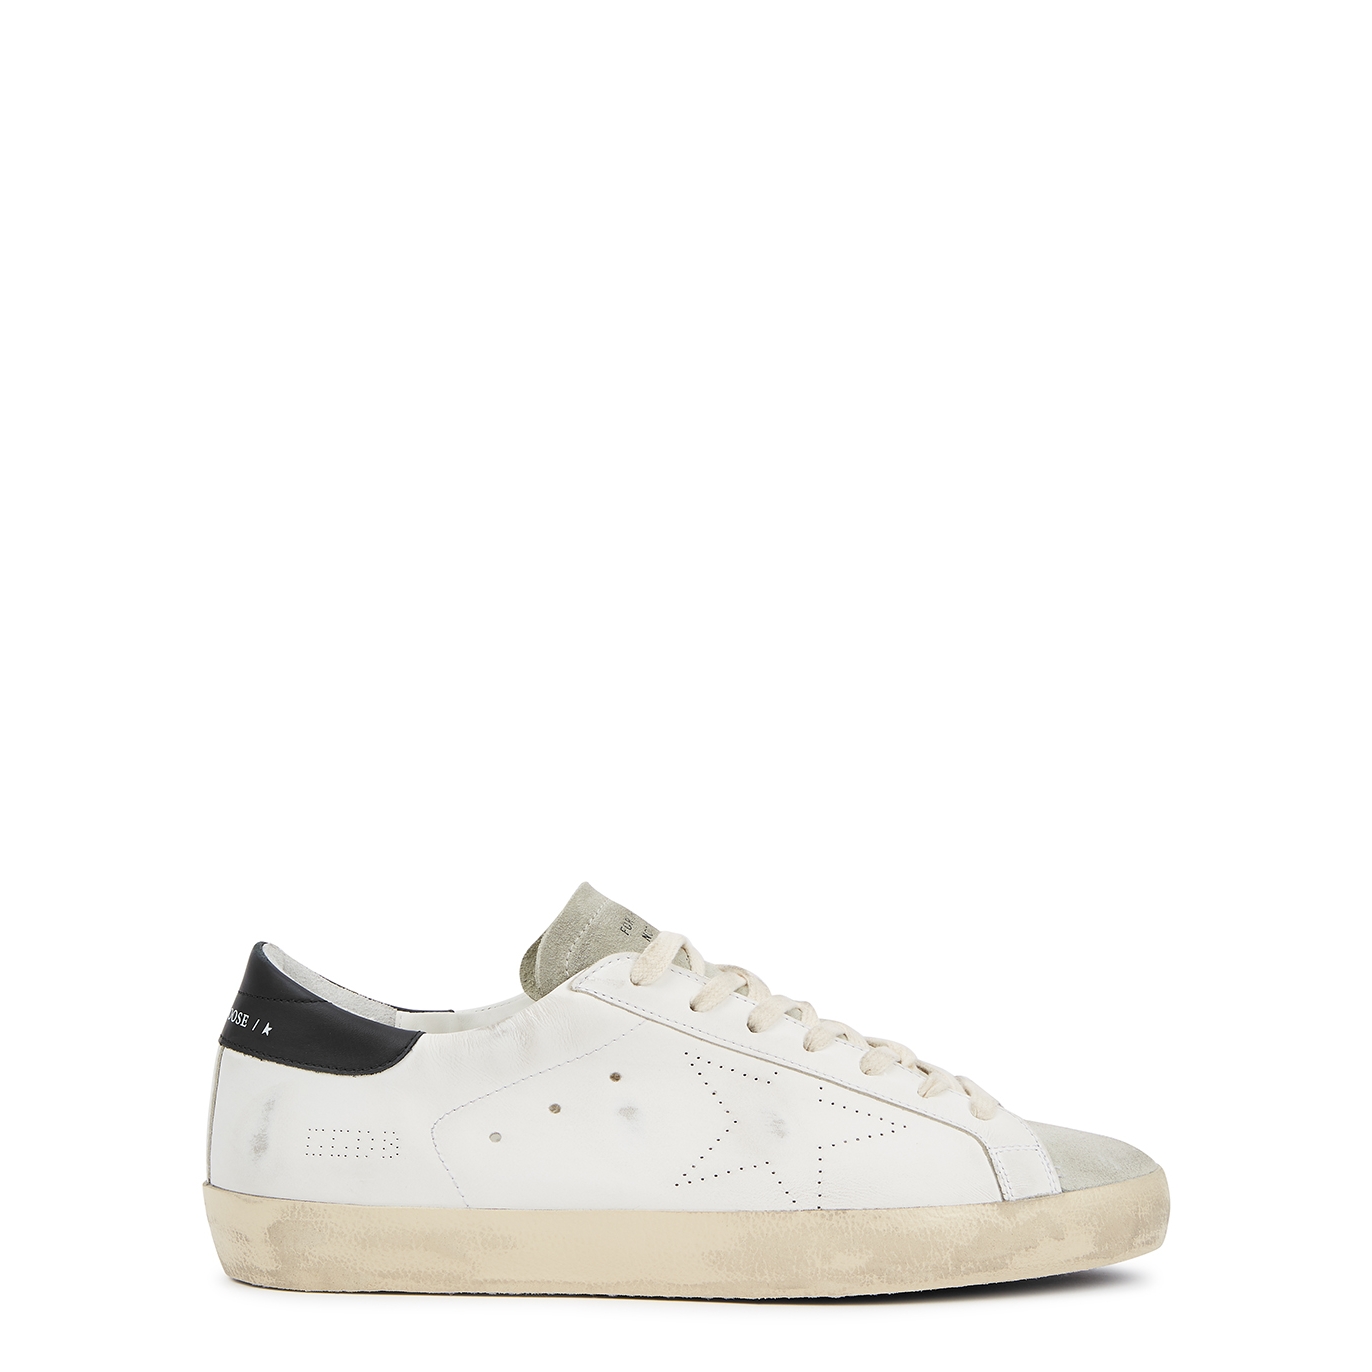 Golden Goose Superstar White Distressed Leather Sneakers - White And Black - 8